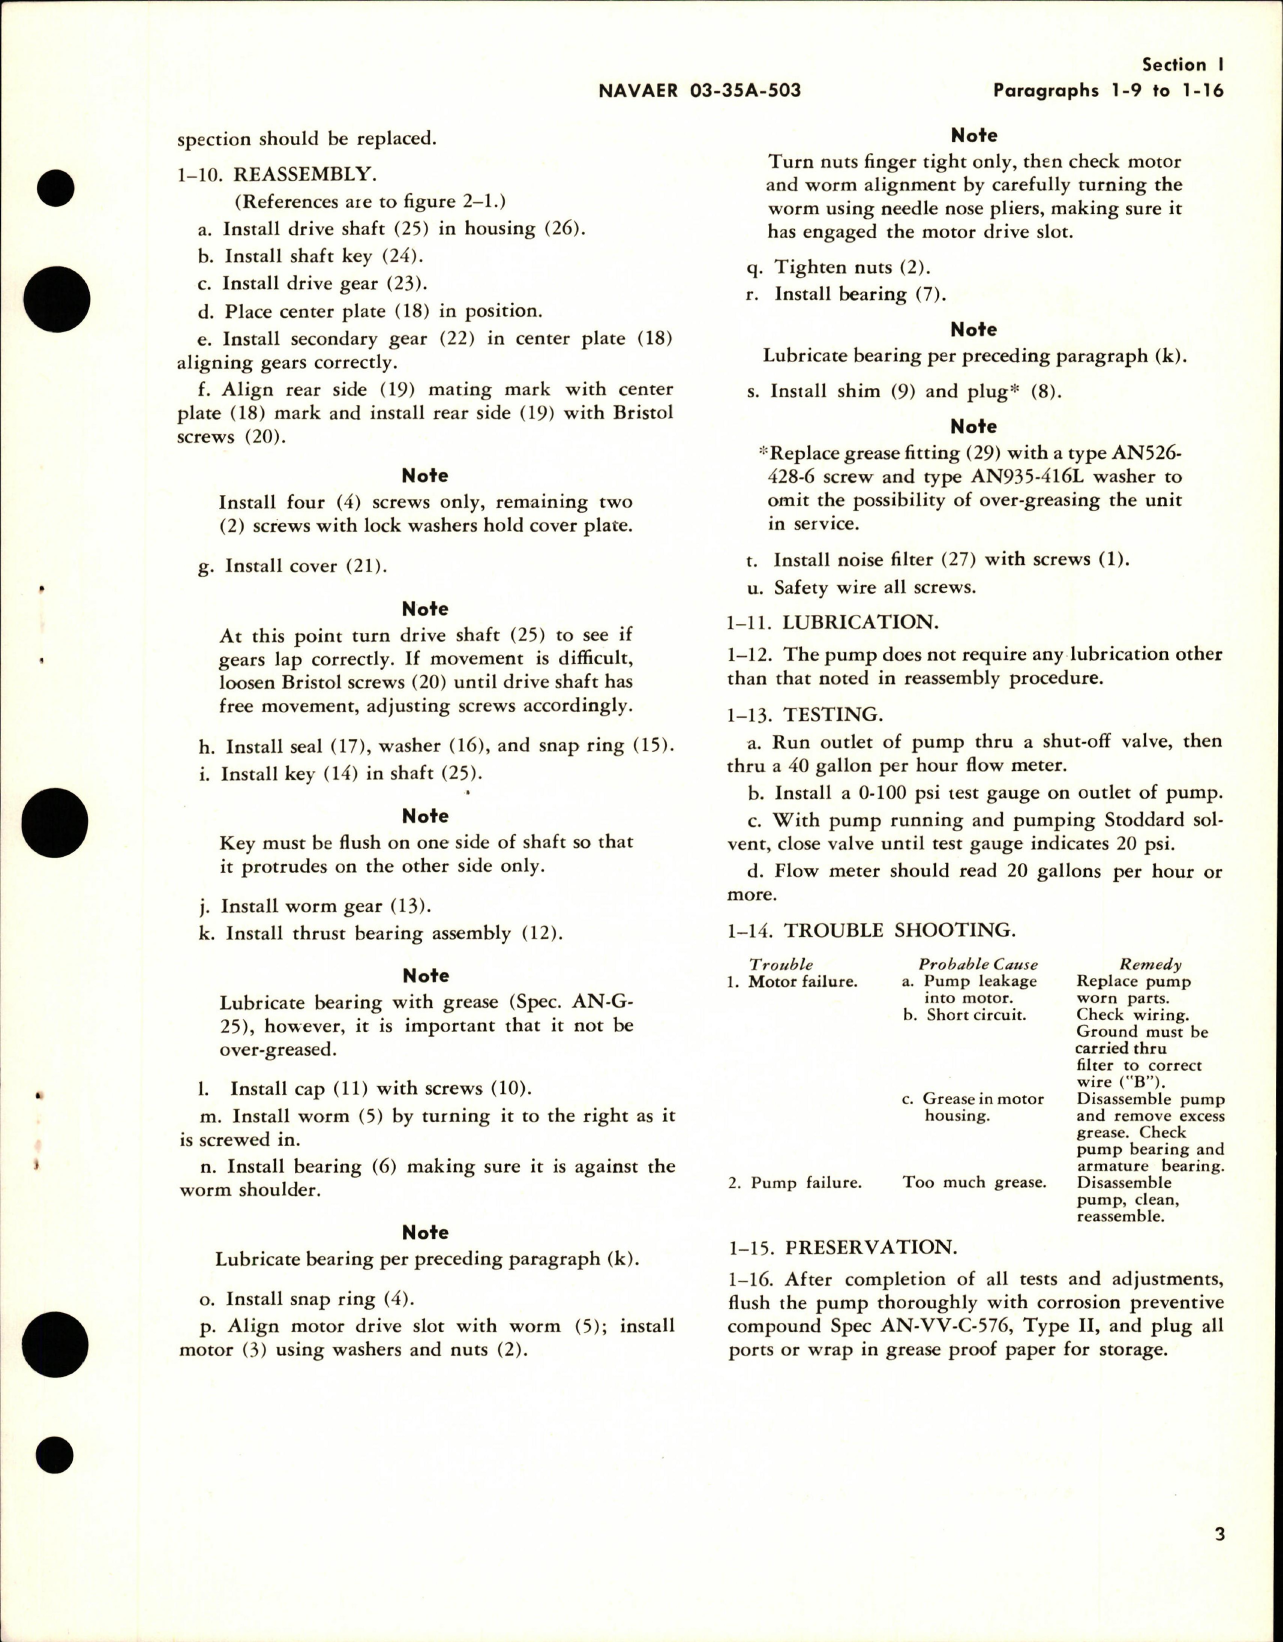 Sample page 5 from AirCorps Library document: Overhaul Instructions with Parts Catalog for Windshield Degreaser Pump - Model 1505-5